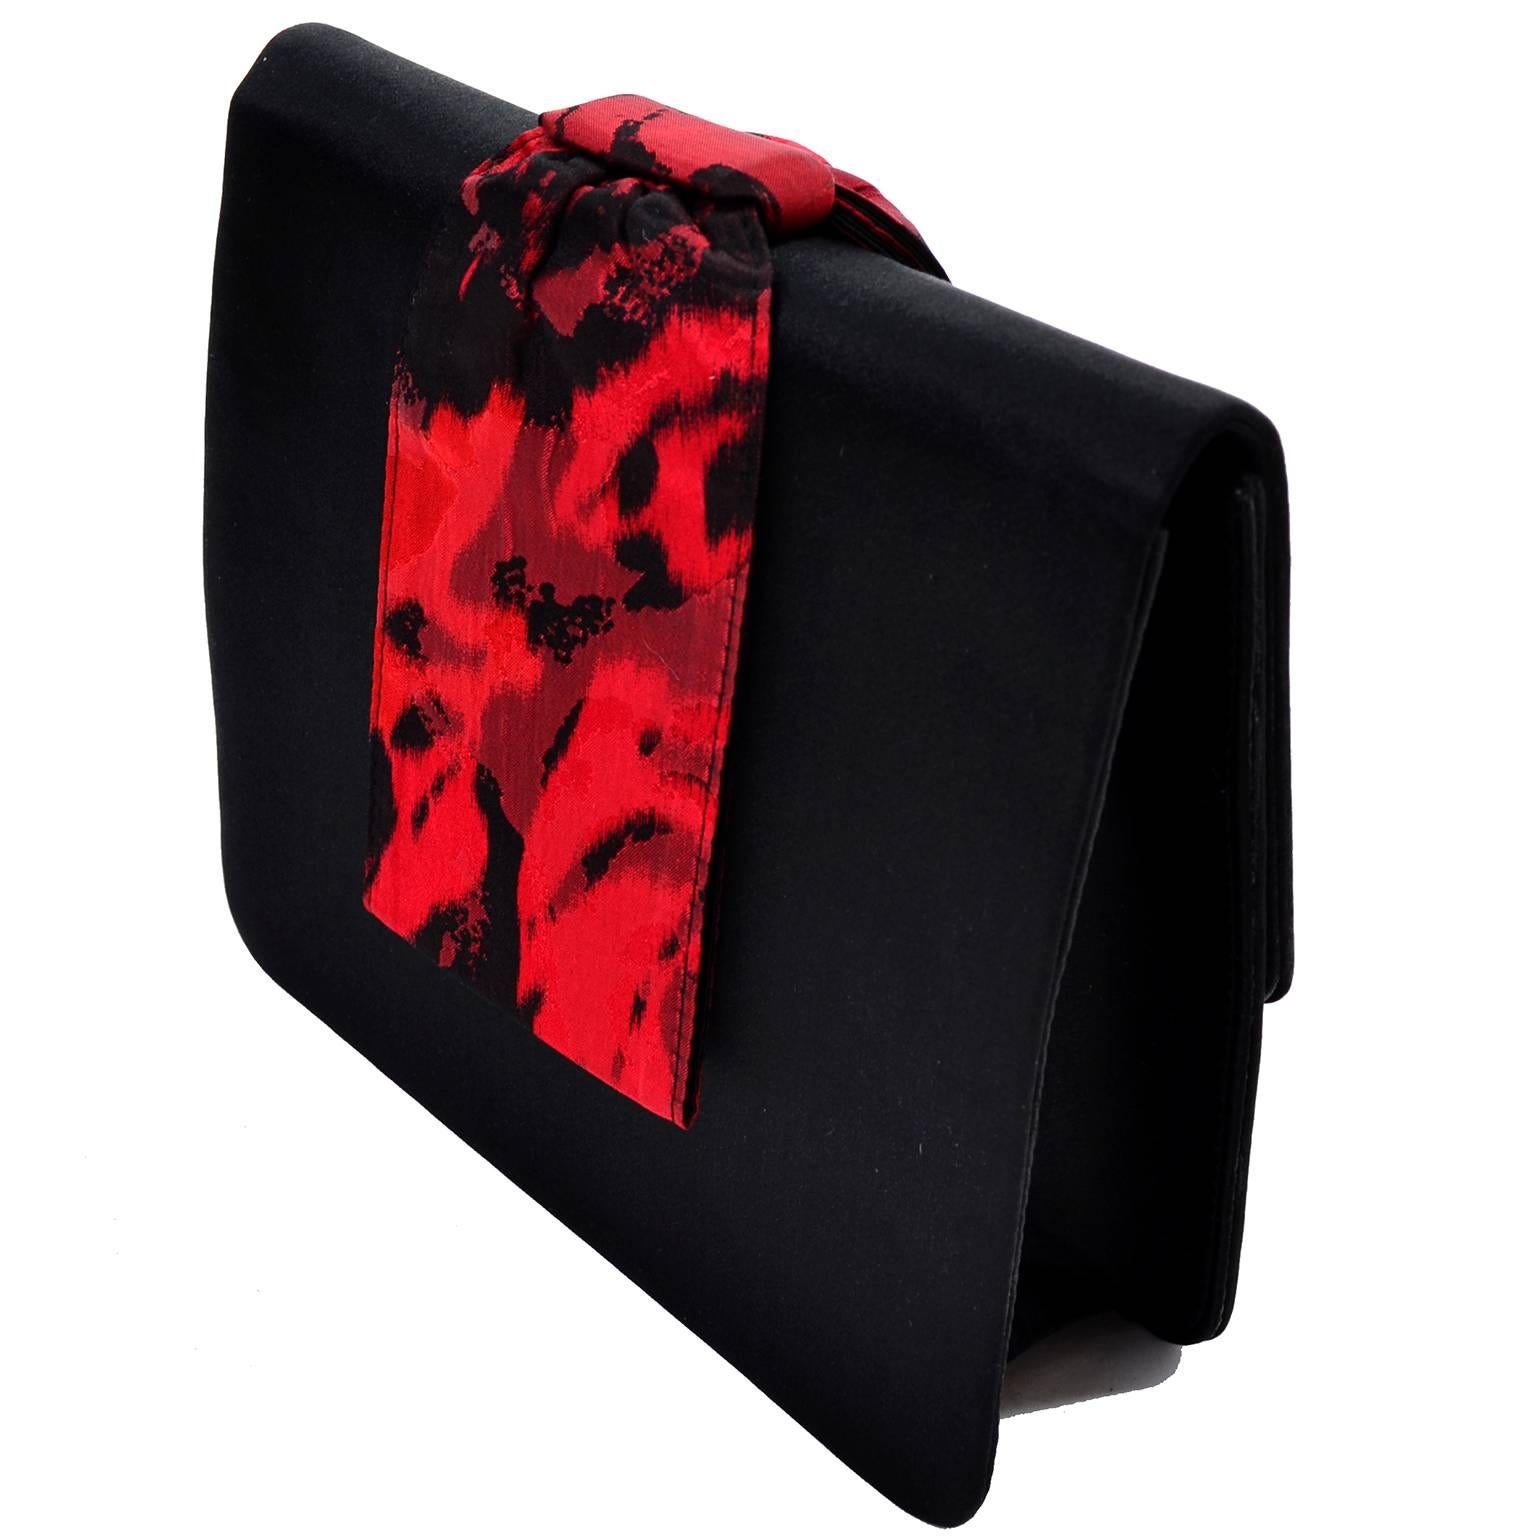 This beautiful signature red Paloma Picasso vintage accessory set has 3 different pieces.  The set includes a black satin clutch handbag with a red and black abstract patterned wrist strap, a black and red satin wrap or scarf, and a pair of fabulous